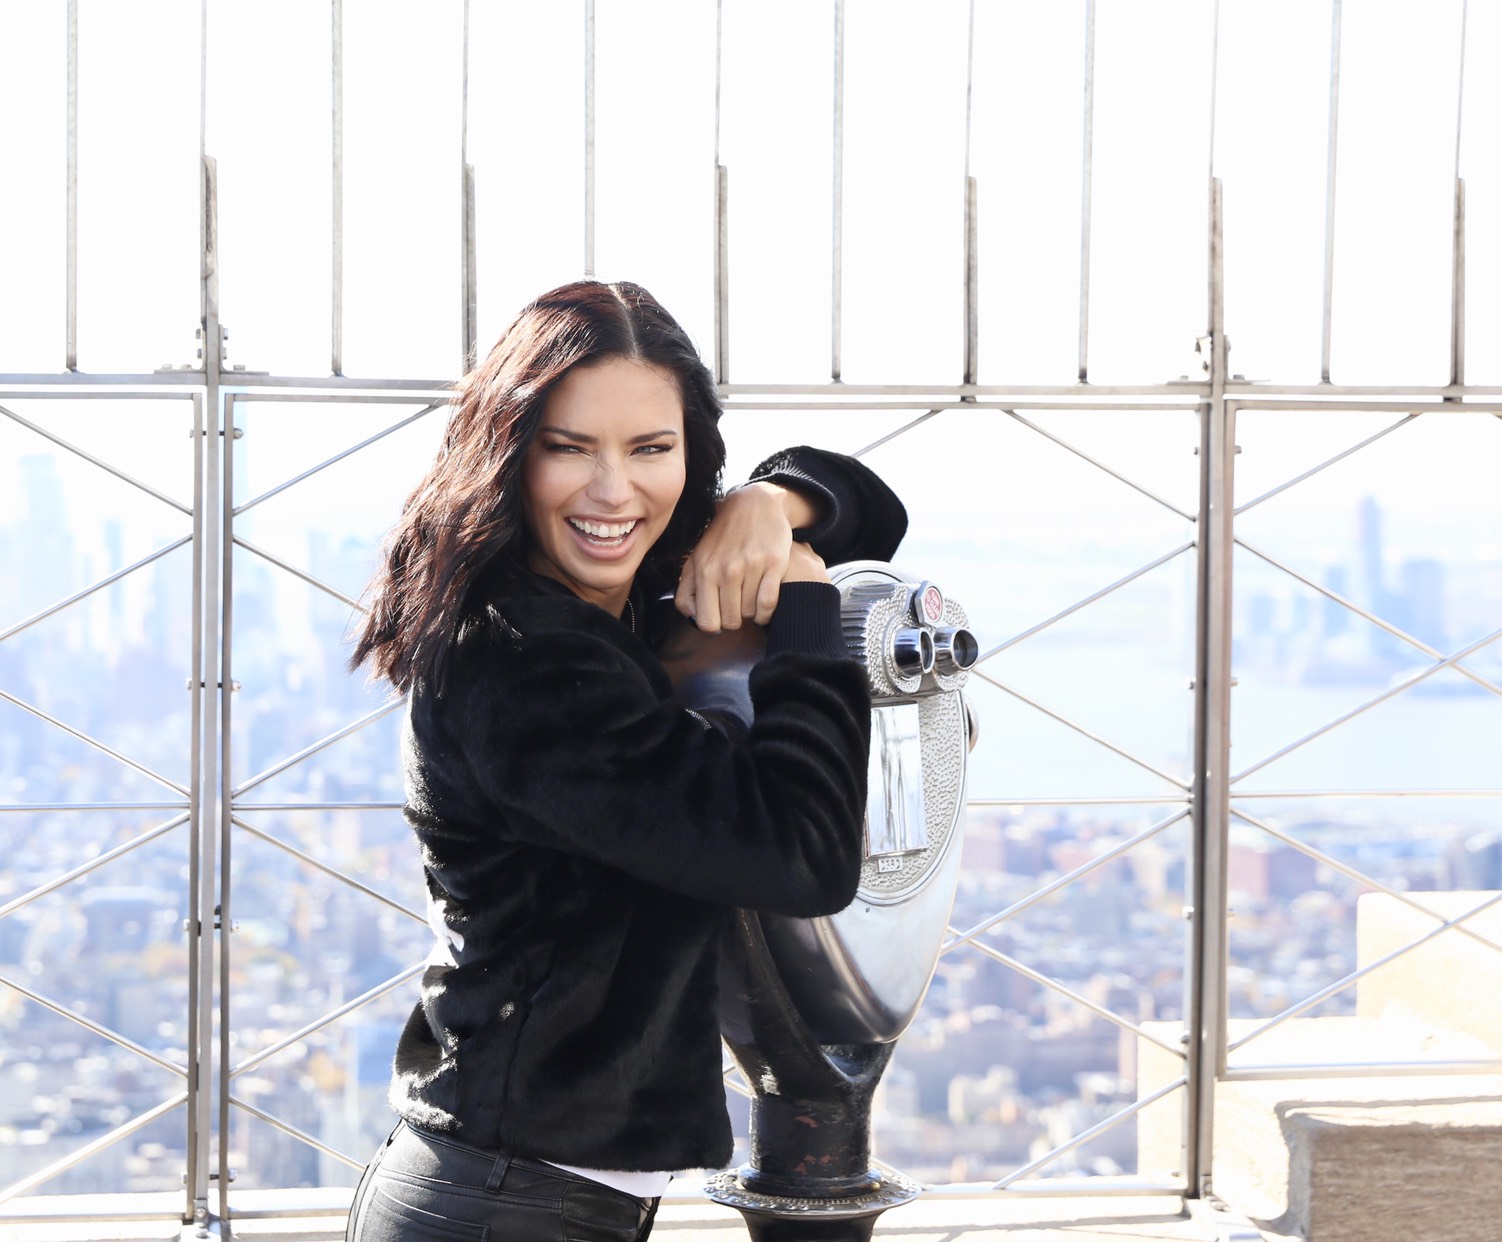 Adriana Lima lighting the Empire State Building